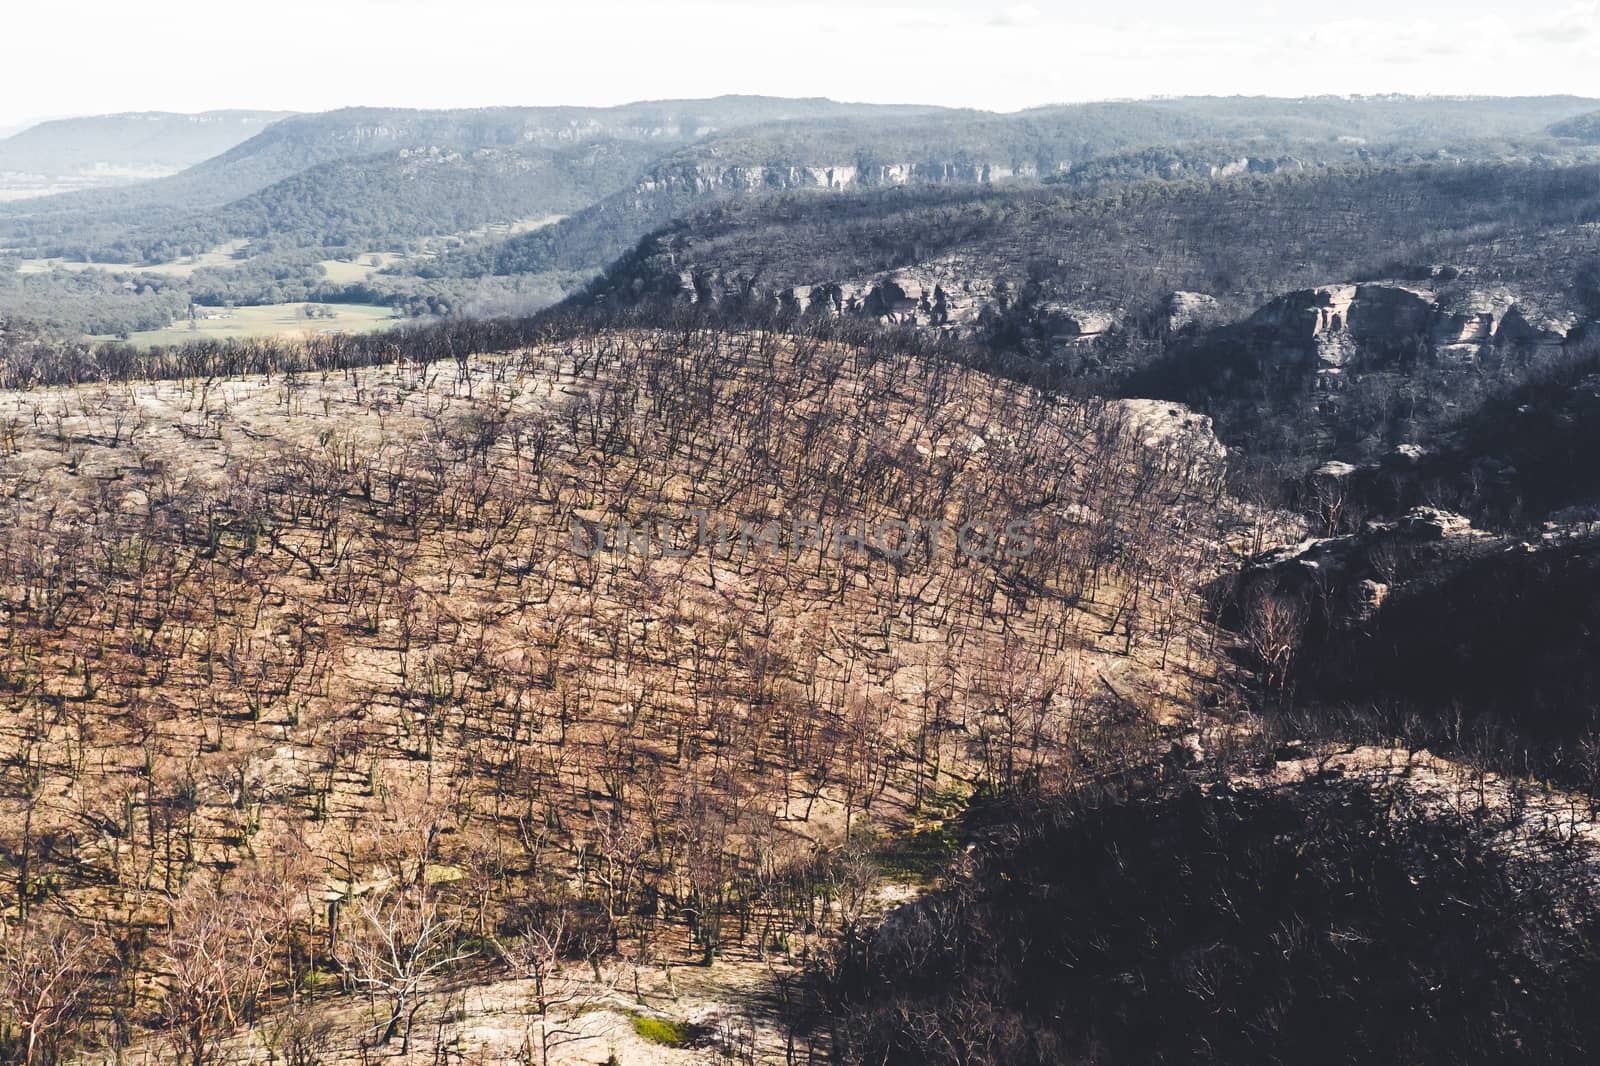 Forest regeneration after bushfire in The Blue Mountains in Australia by WittkePhotos